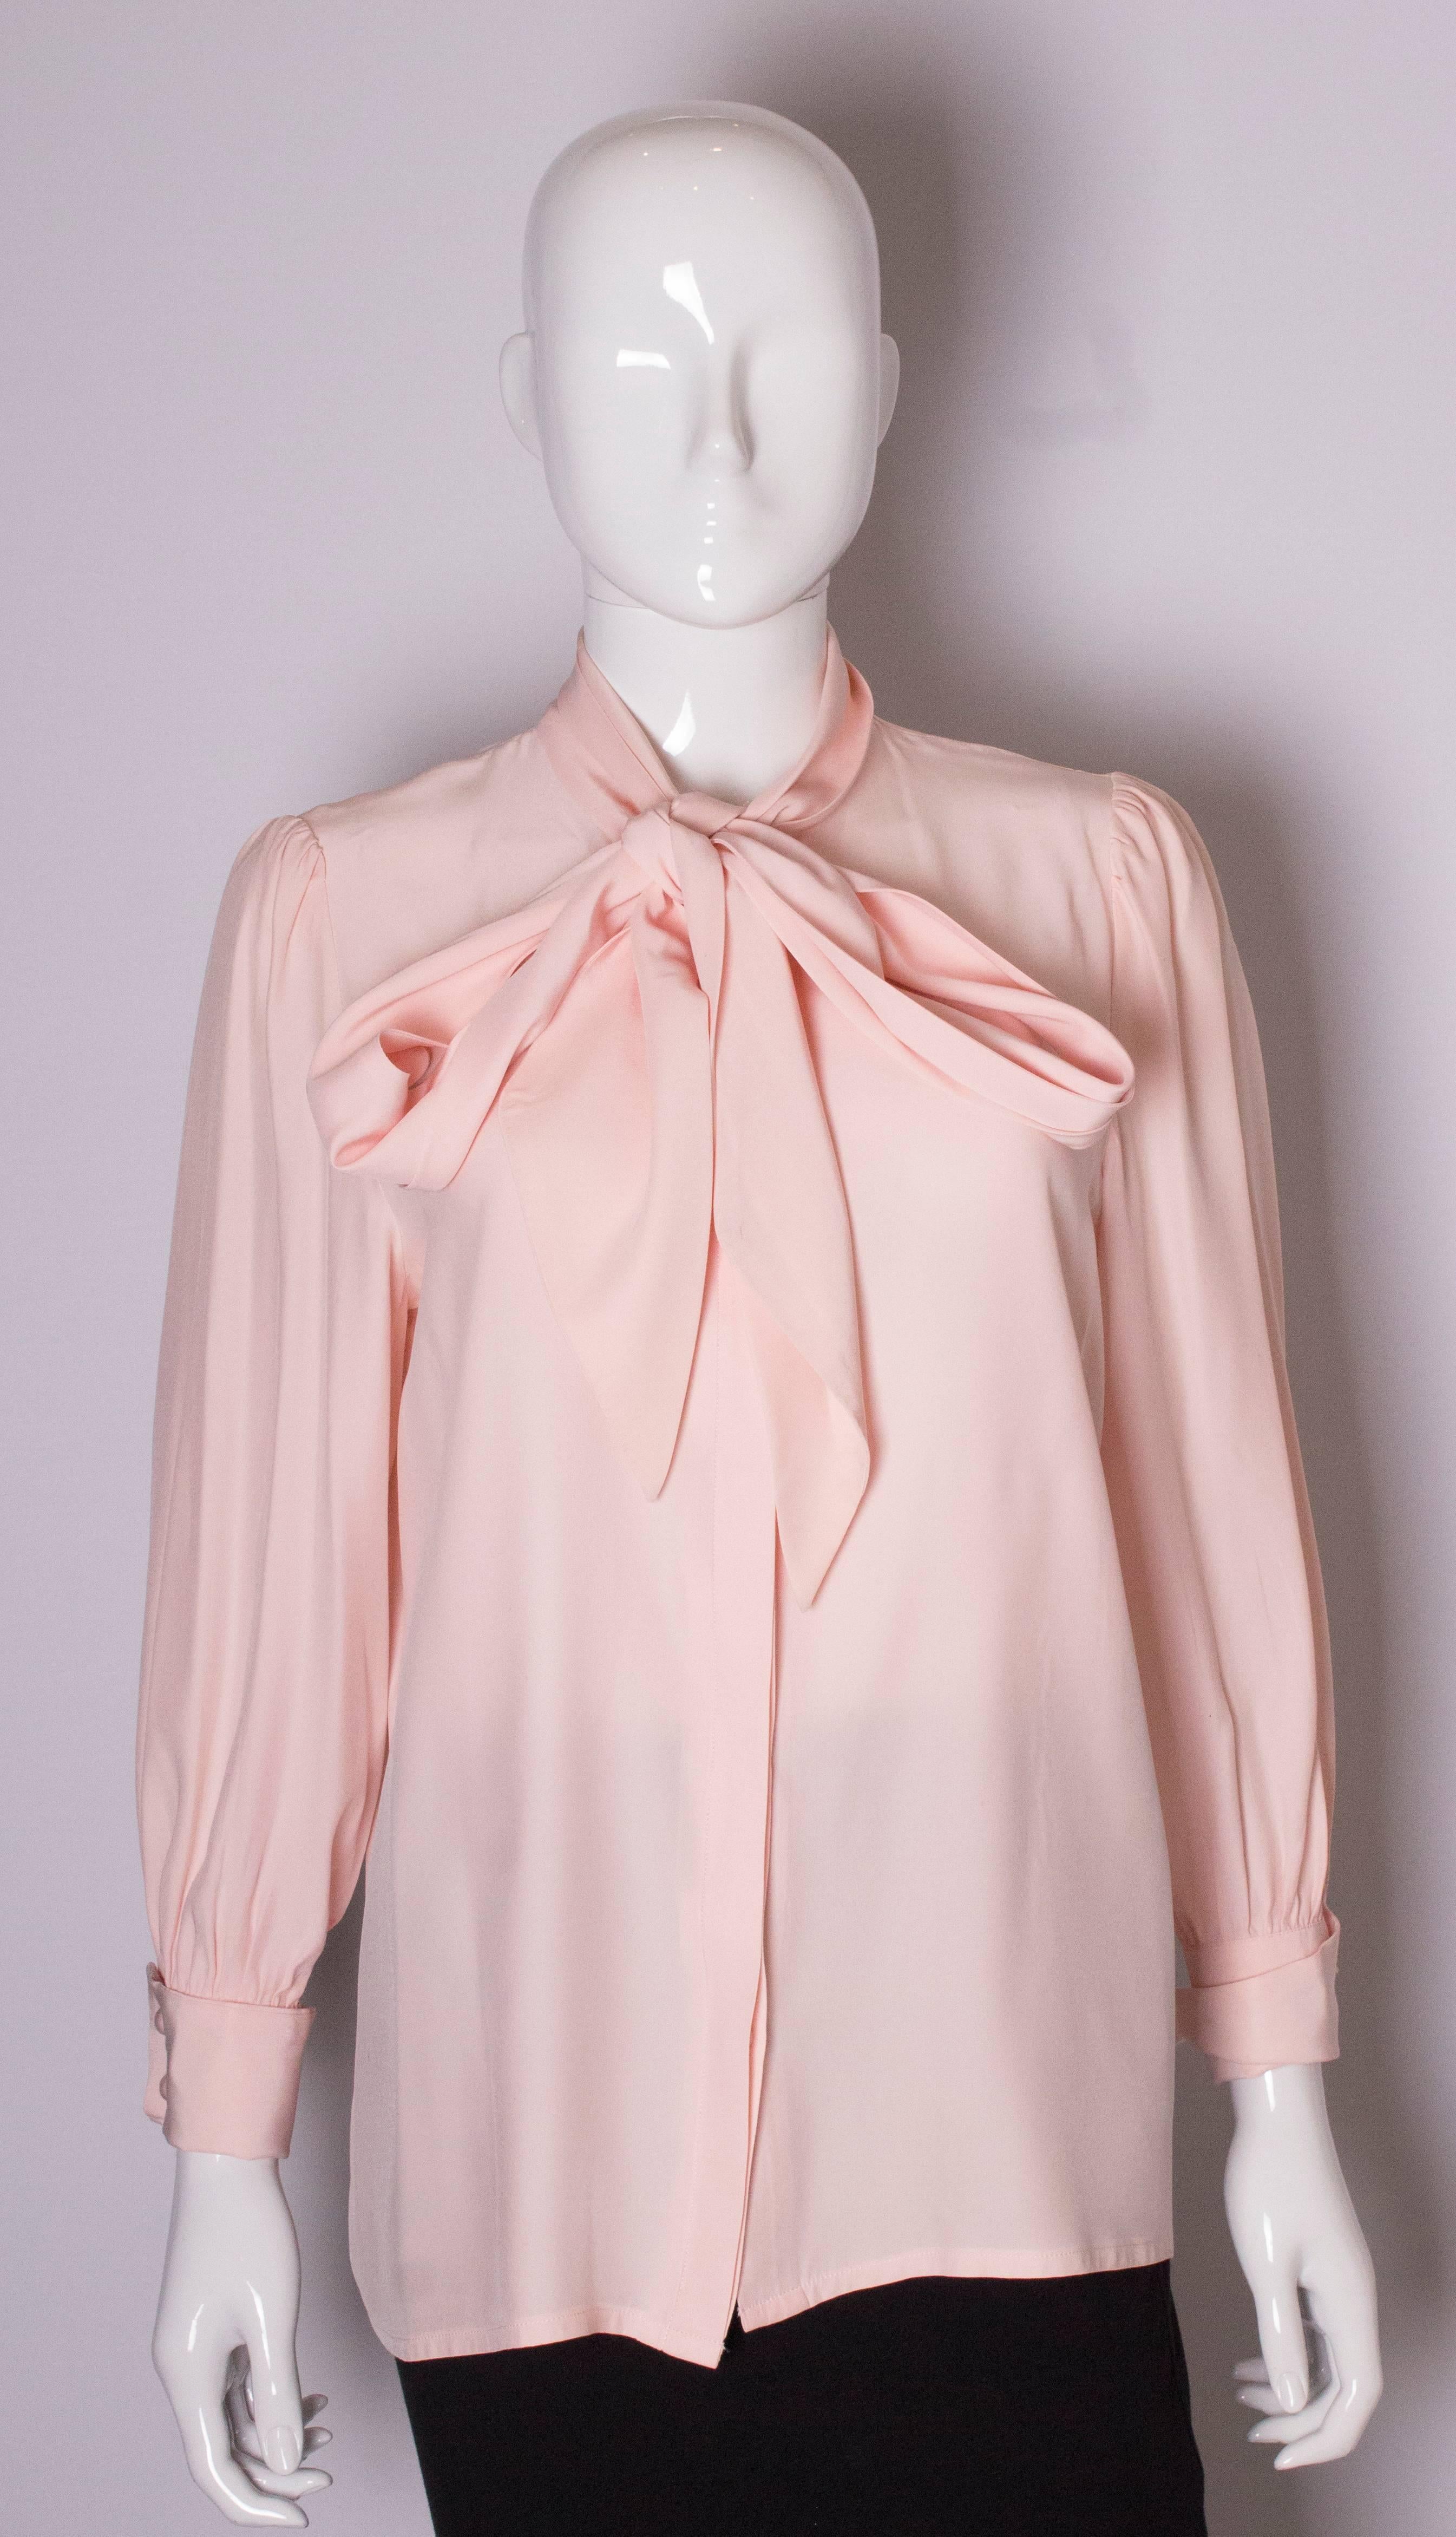 A chic pink silk blouse by Hardy Amies. The blouse has a tie neck and double cuffs.